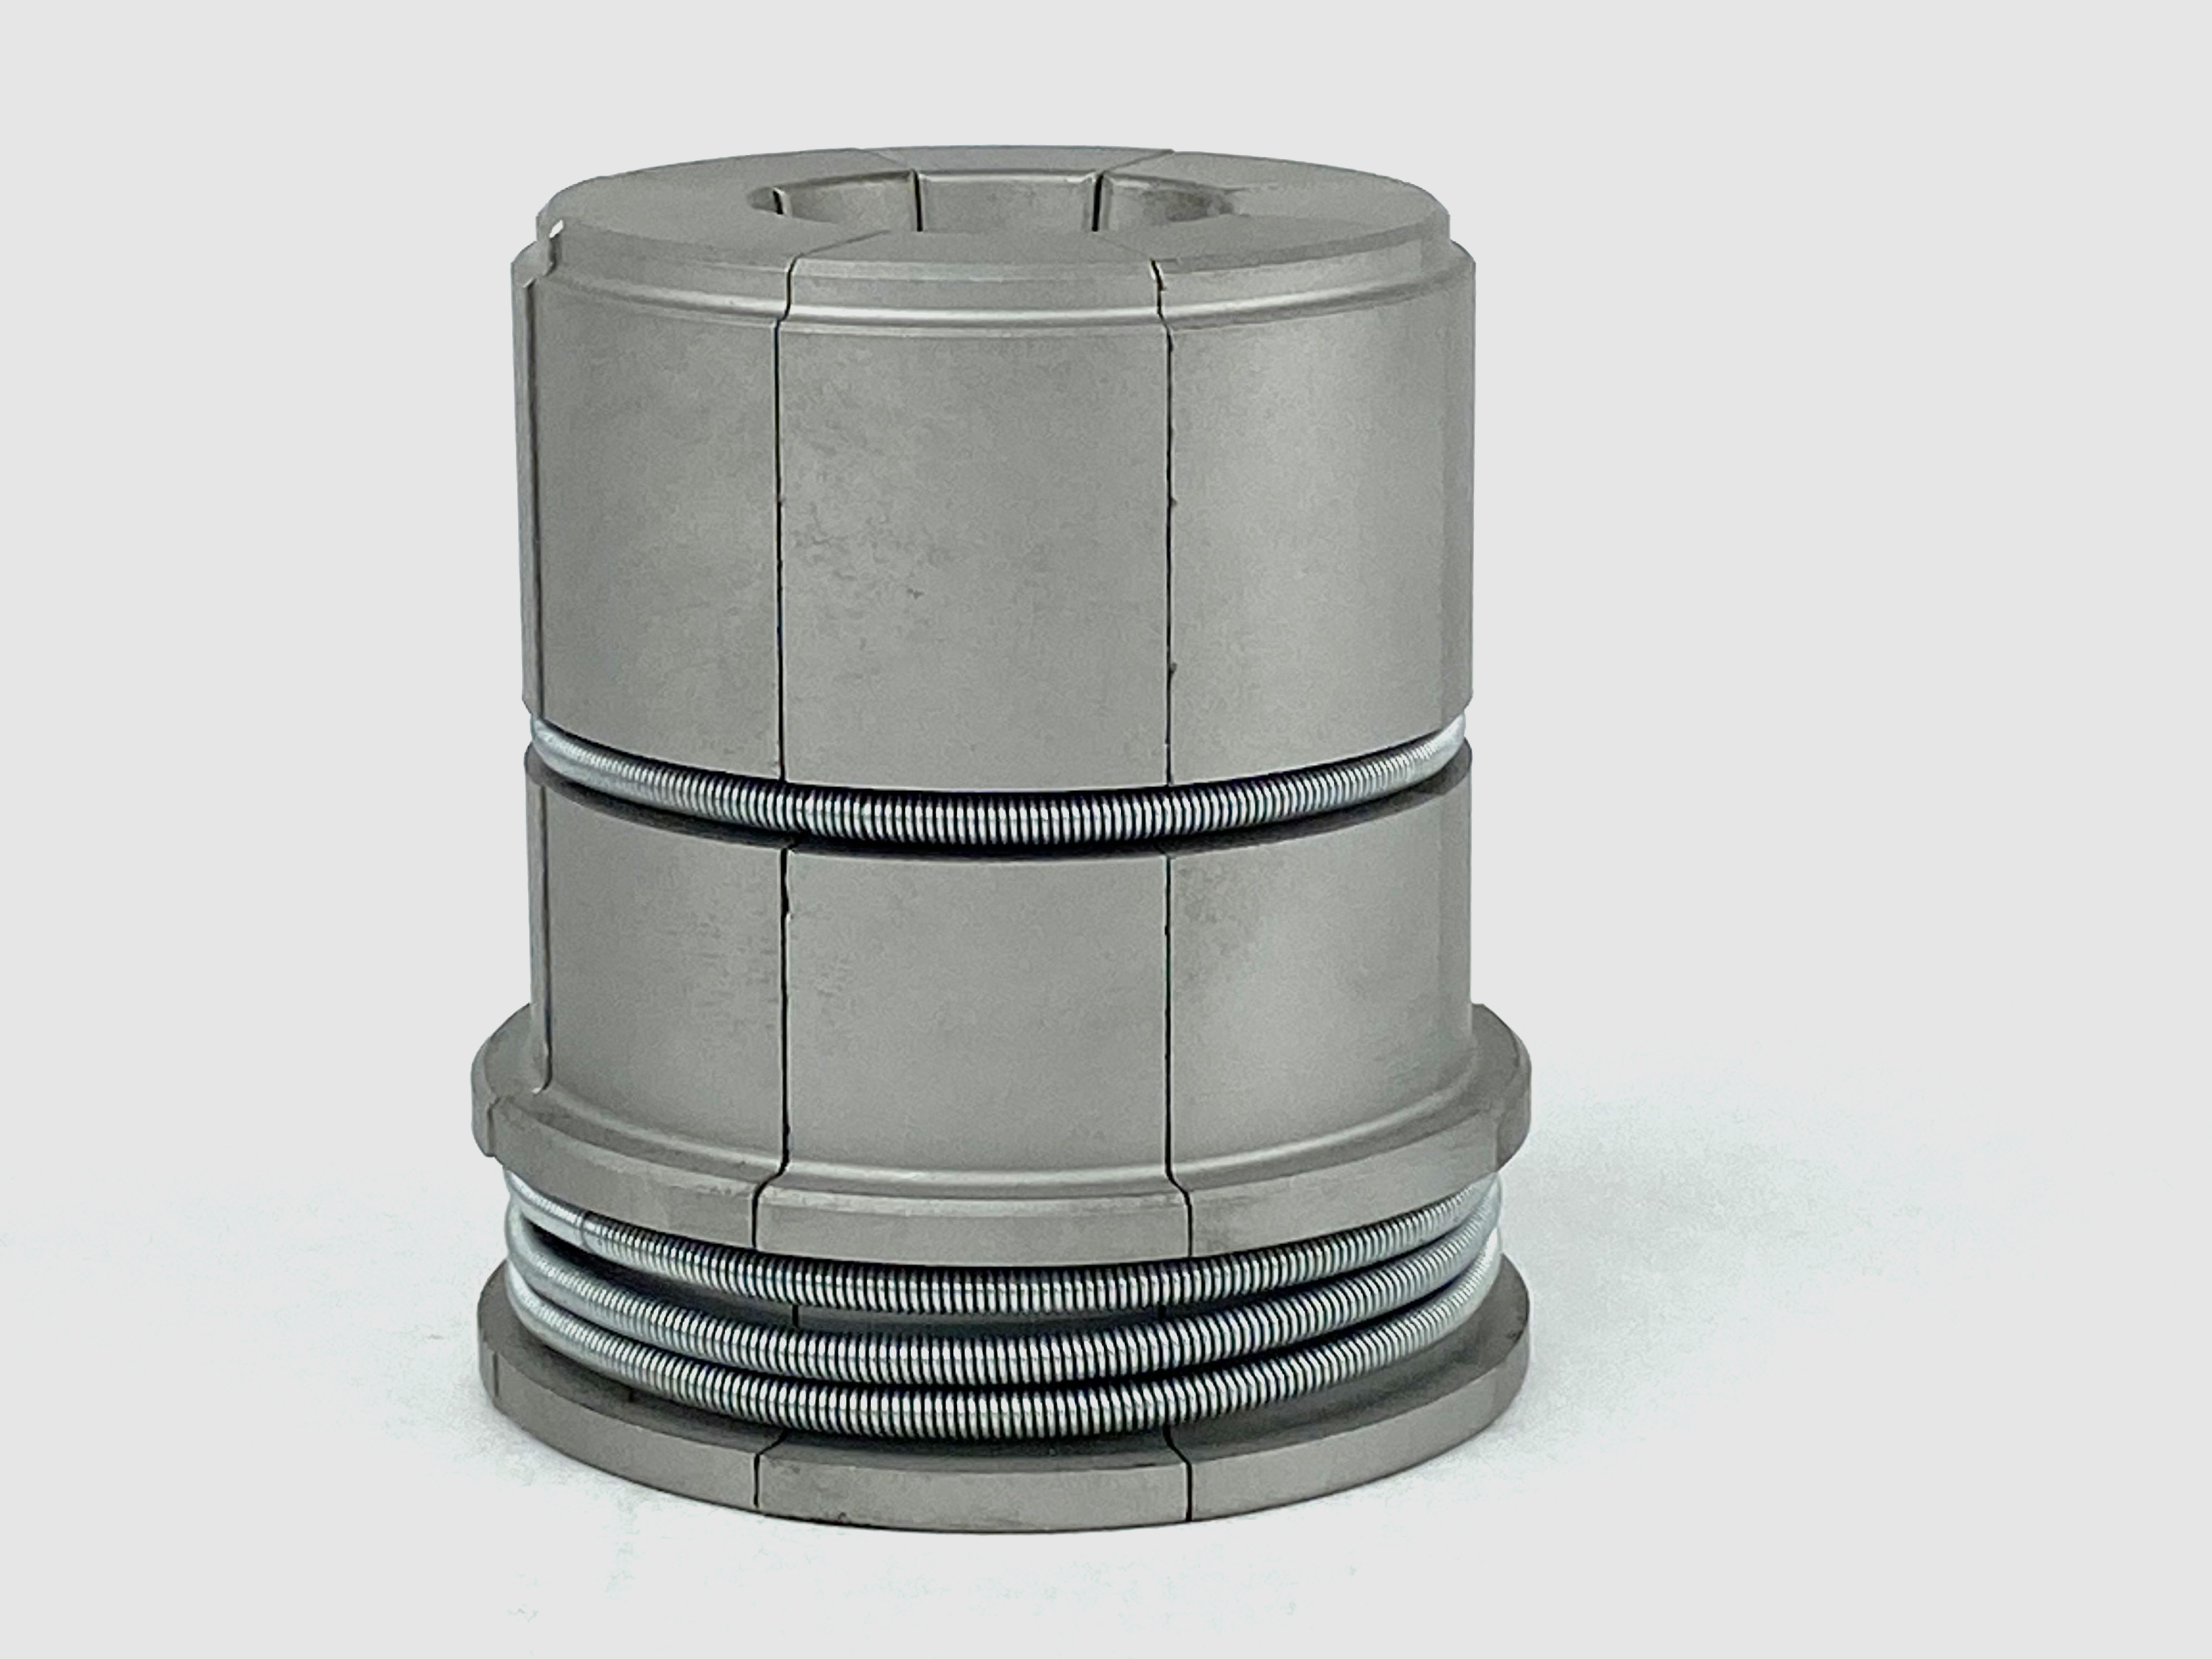 A cylindrical, silver-colored direct-fit segment is shown against a white background. Huth manufactures the part to use with the PKSA112 Arbor. 